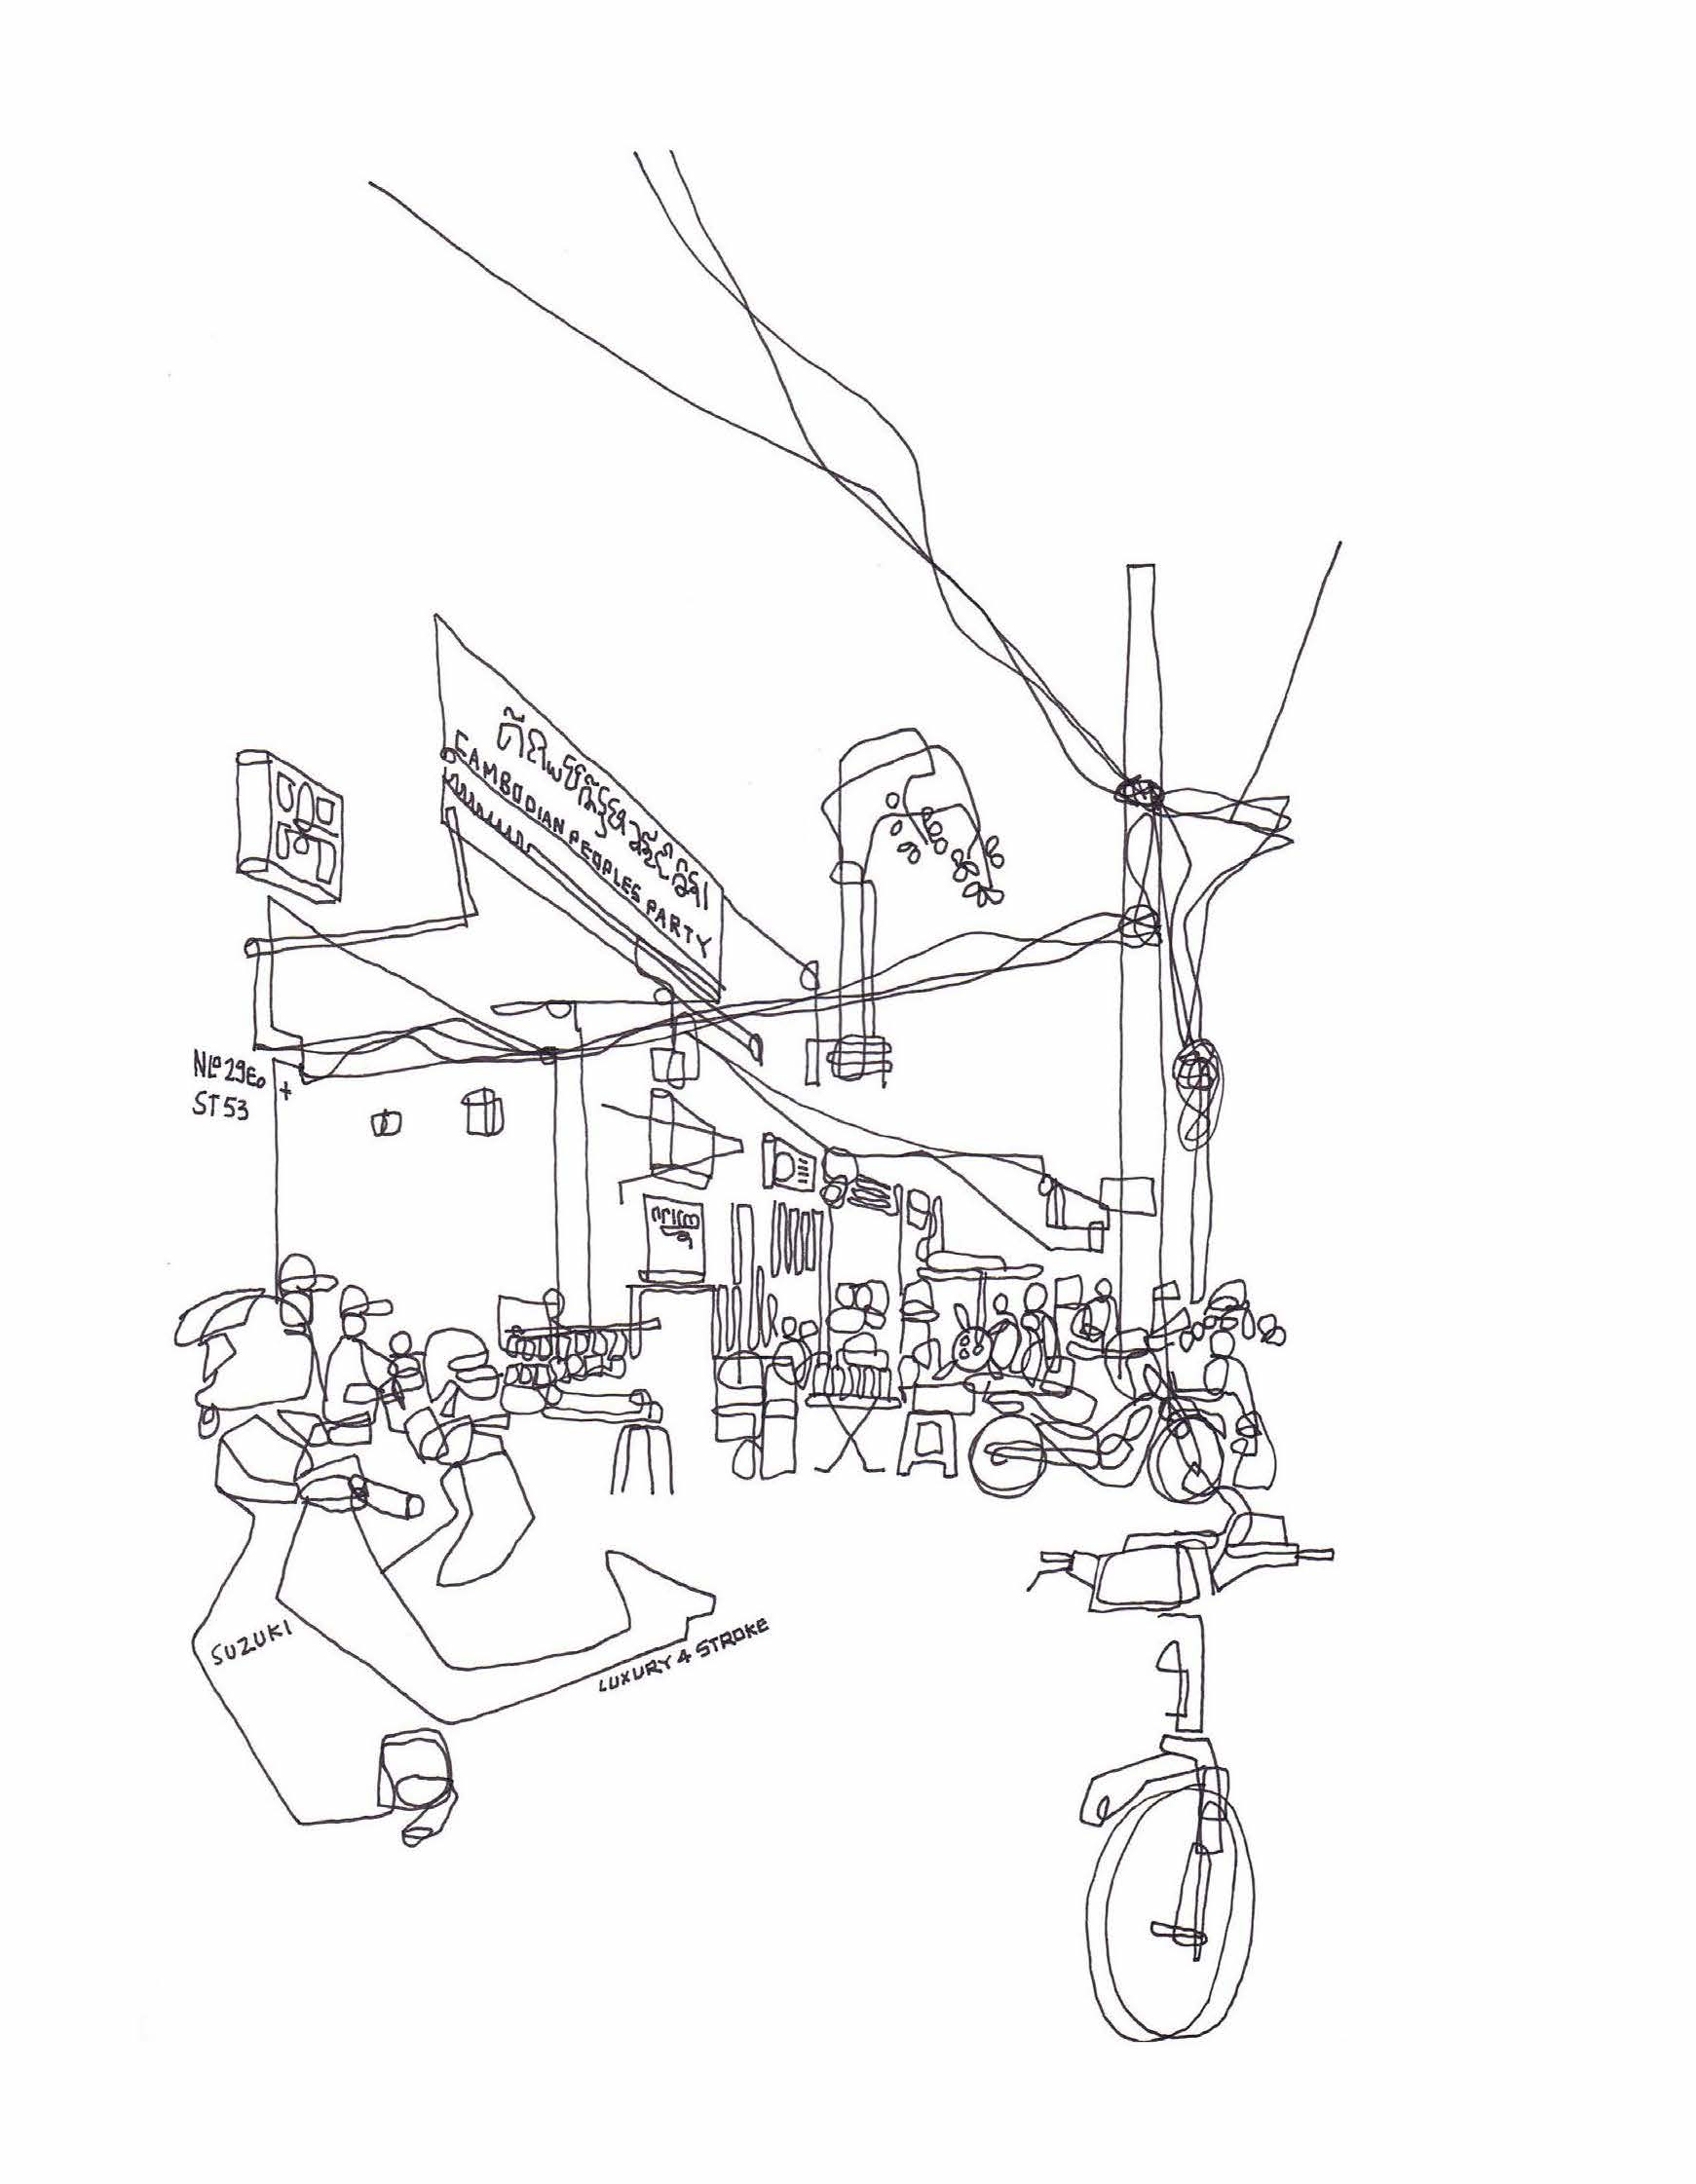 cambodia sketches 2015_Page_05.jpg